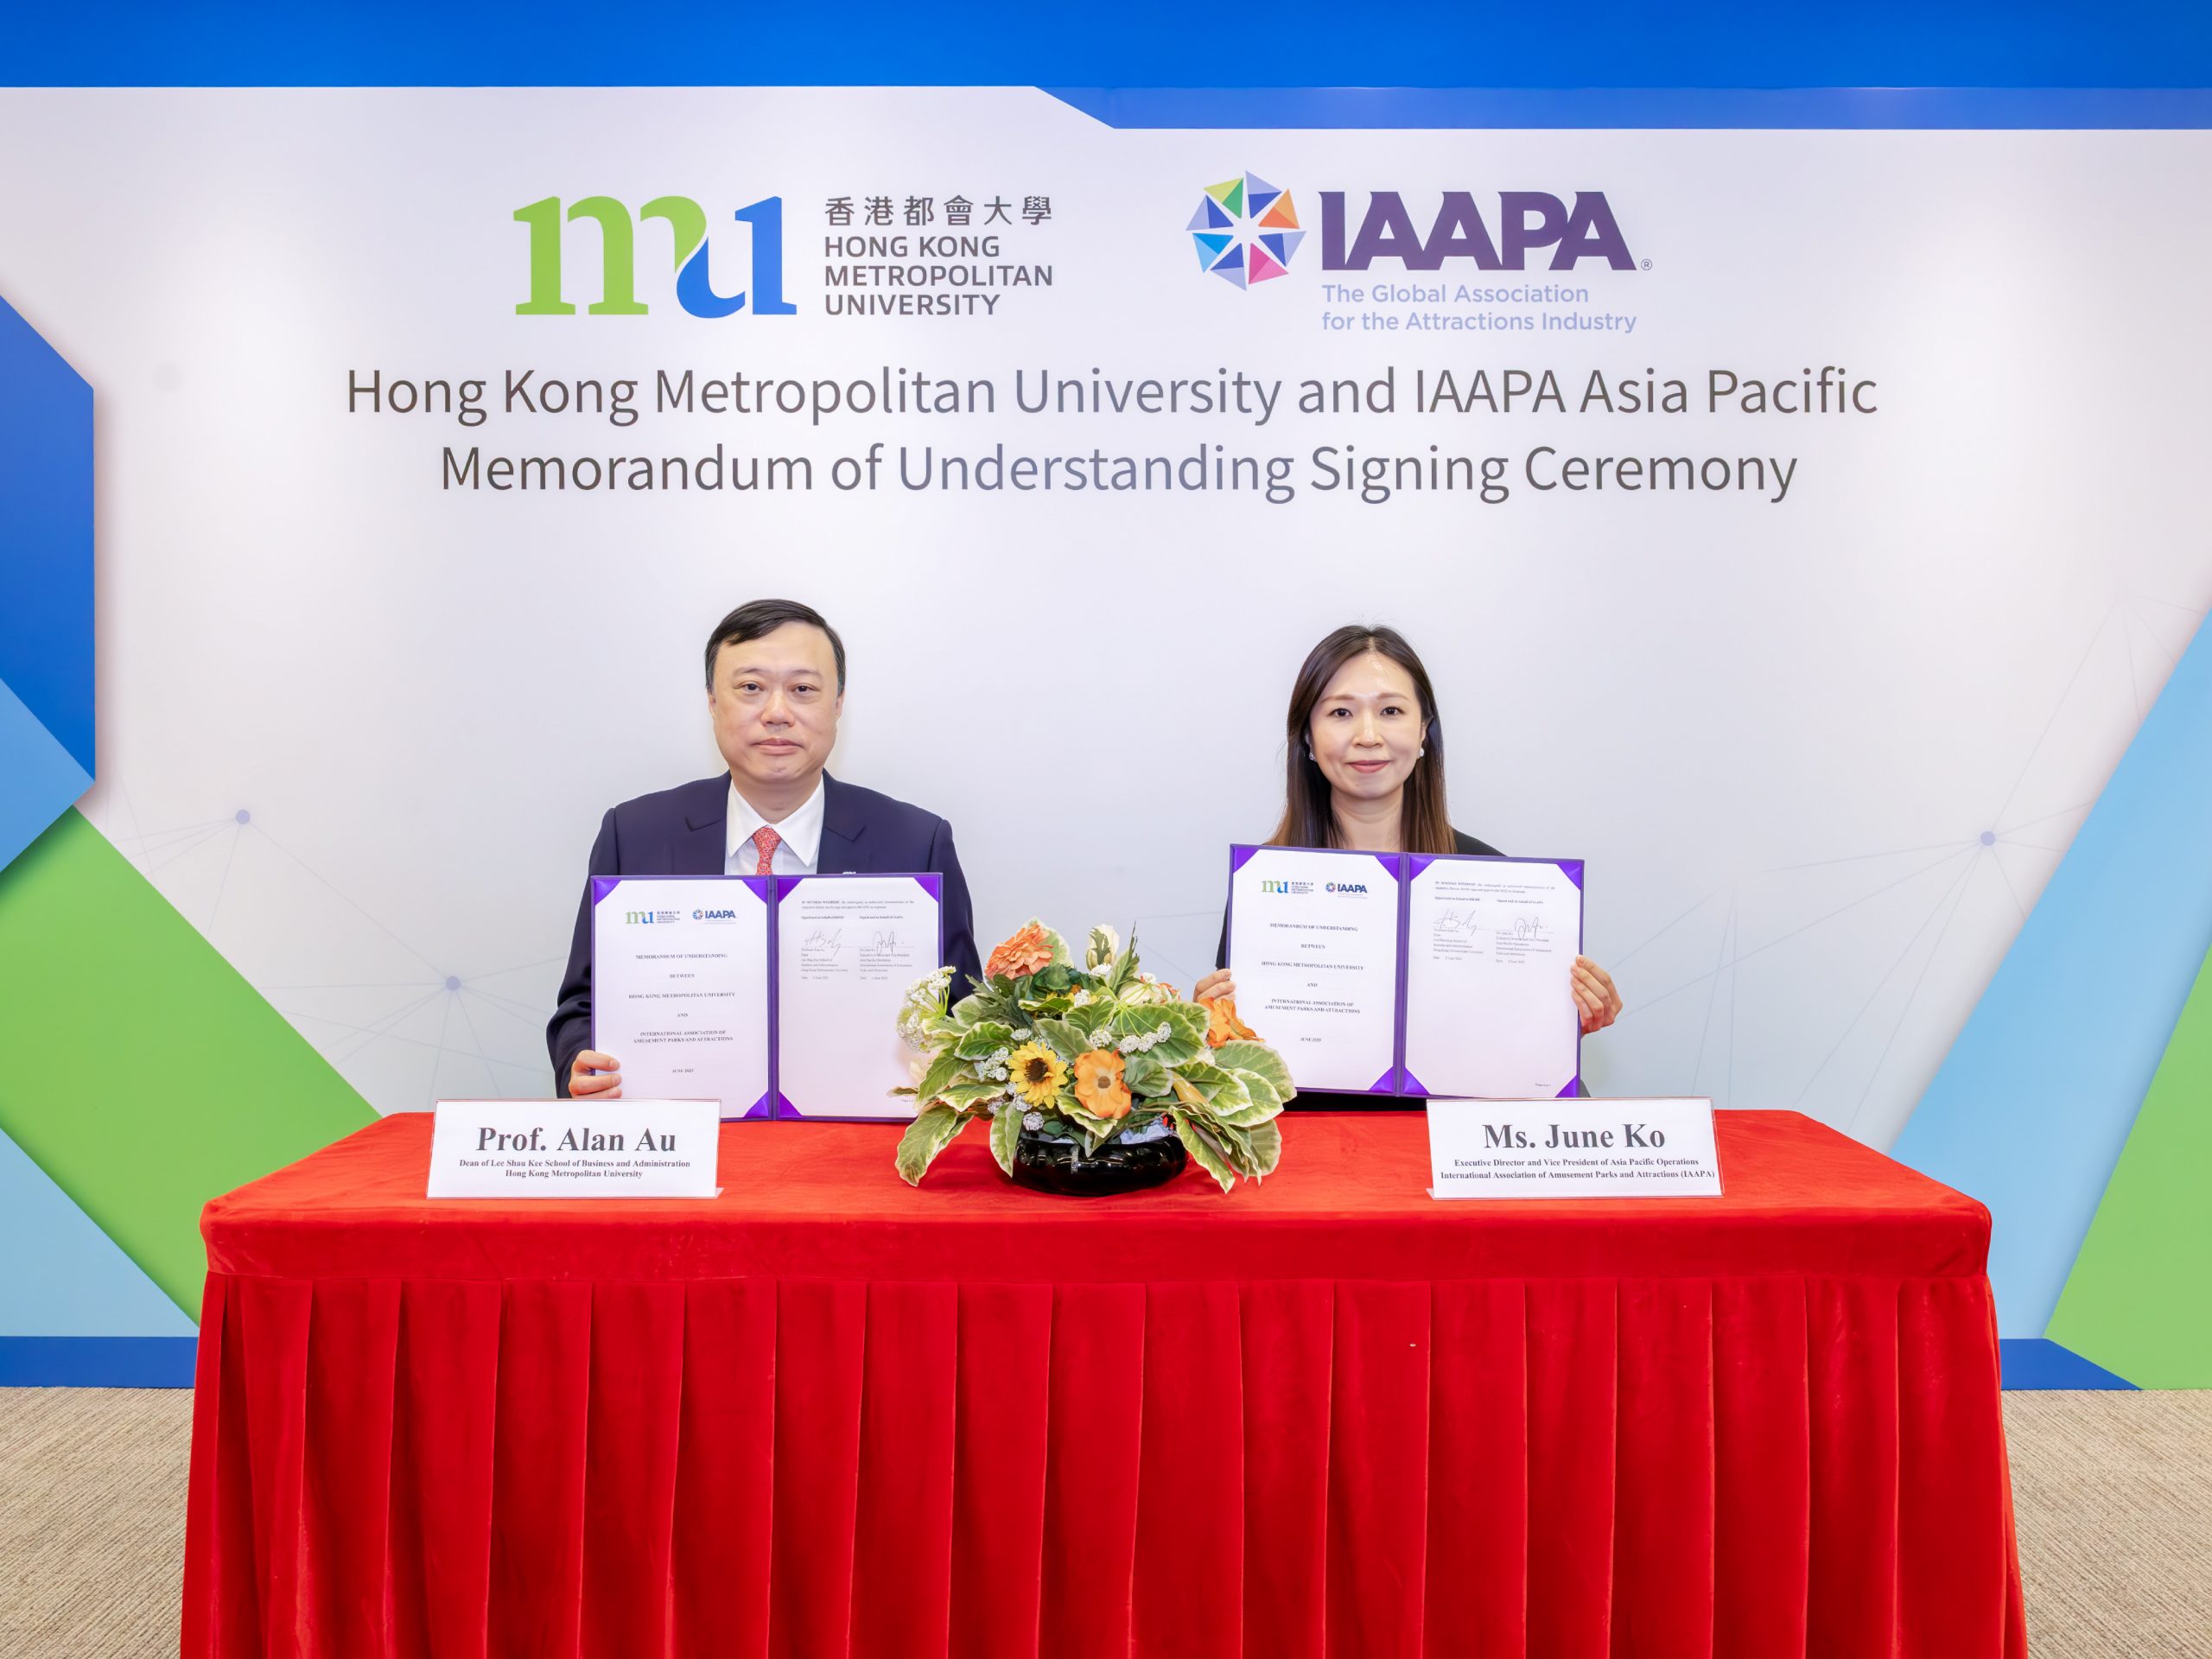 The MoU is signed by Dean of HKMU Business School Prof. Alan Au (left) and Executive Director and Vice President of IAAPA Asia Pacific Operations June Ko.